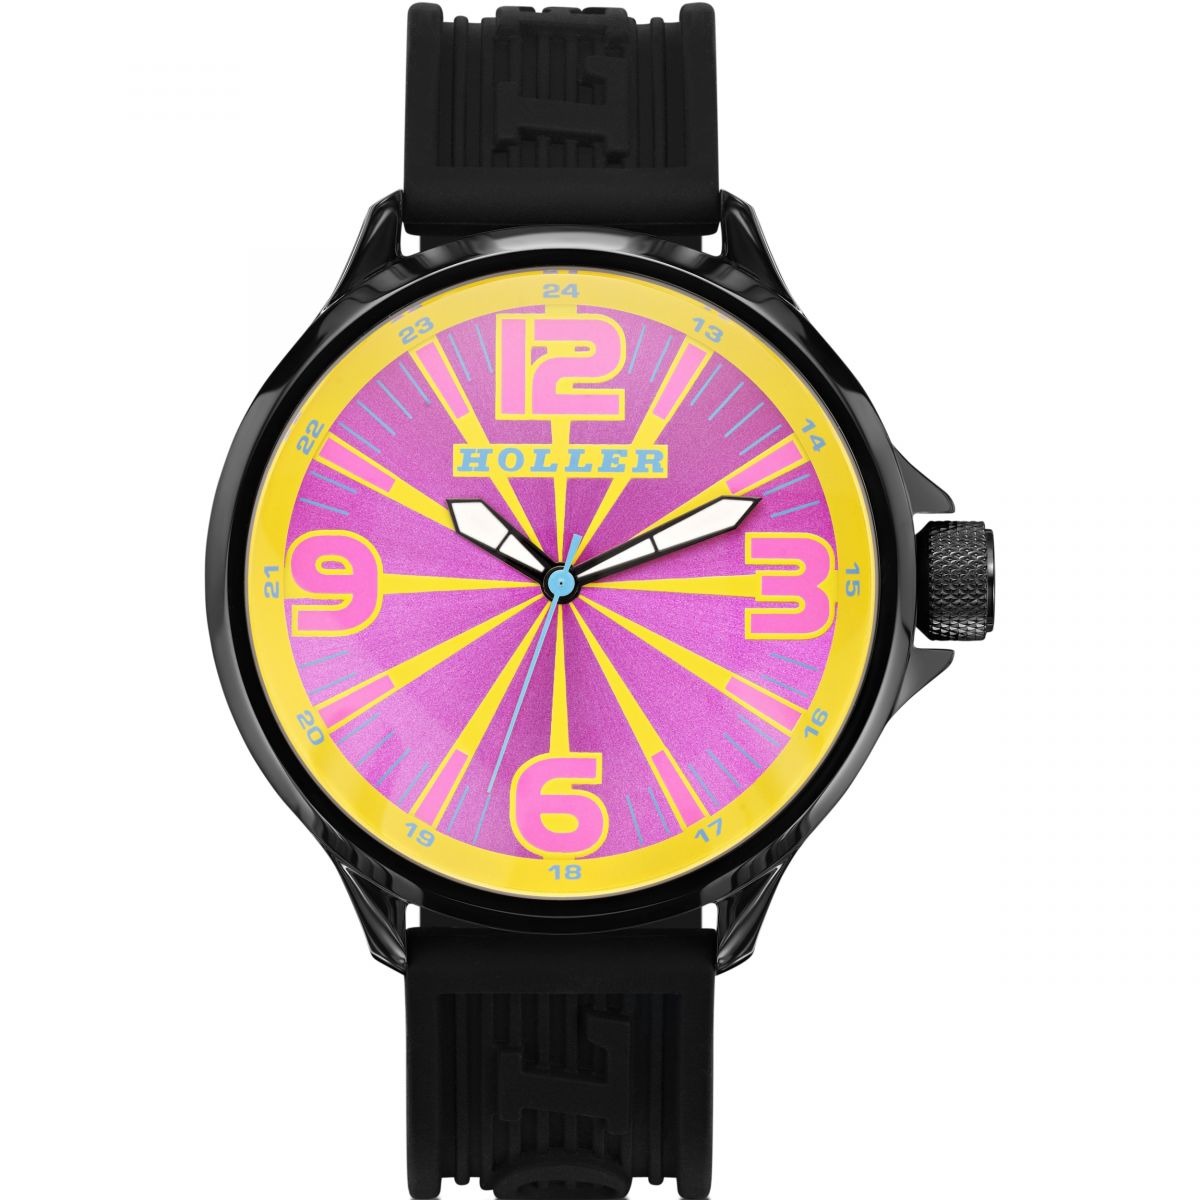 Holler - Watch in Pink for Man by Watch Shop GOOFASH